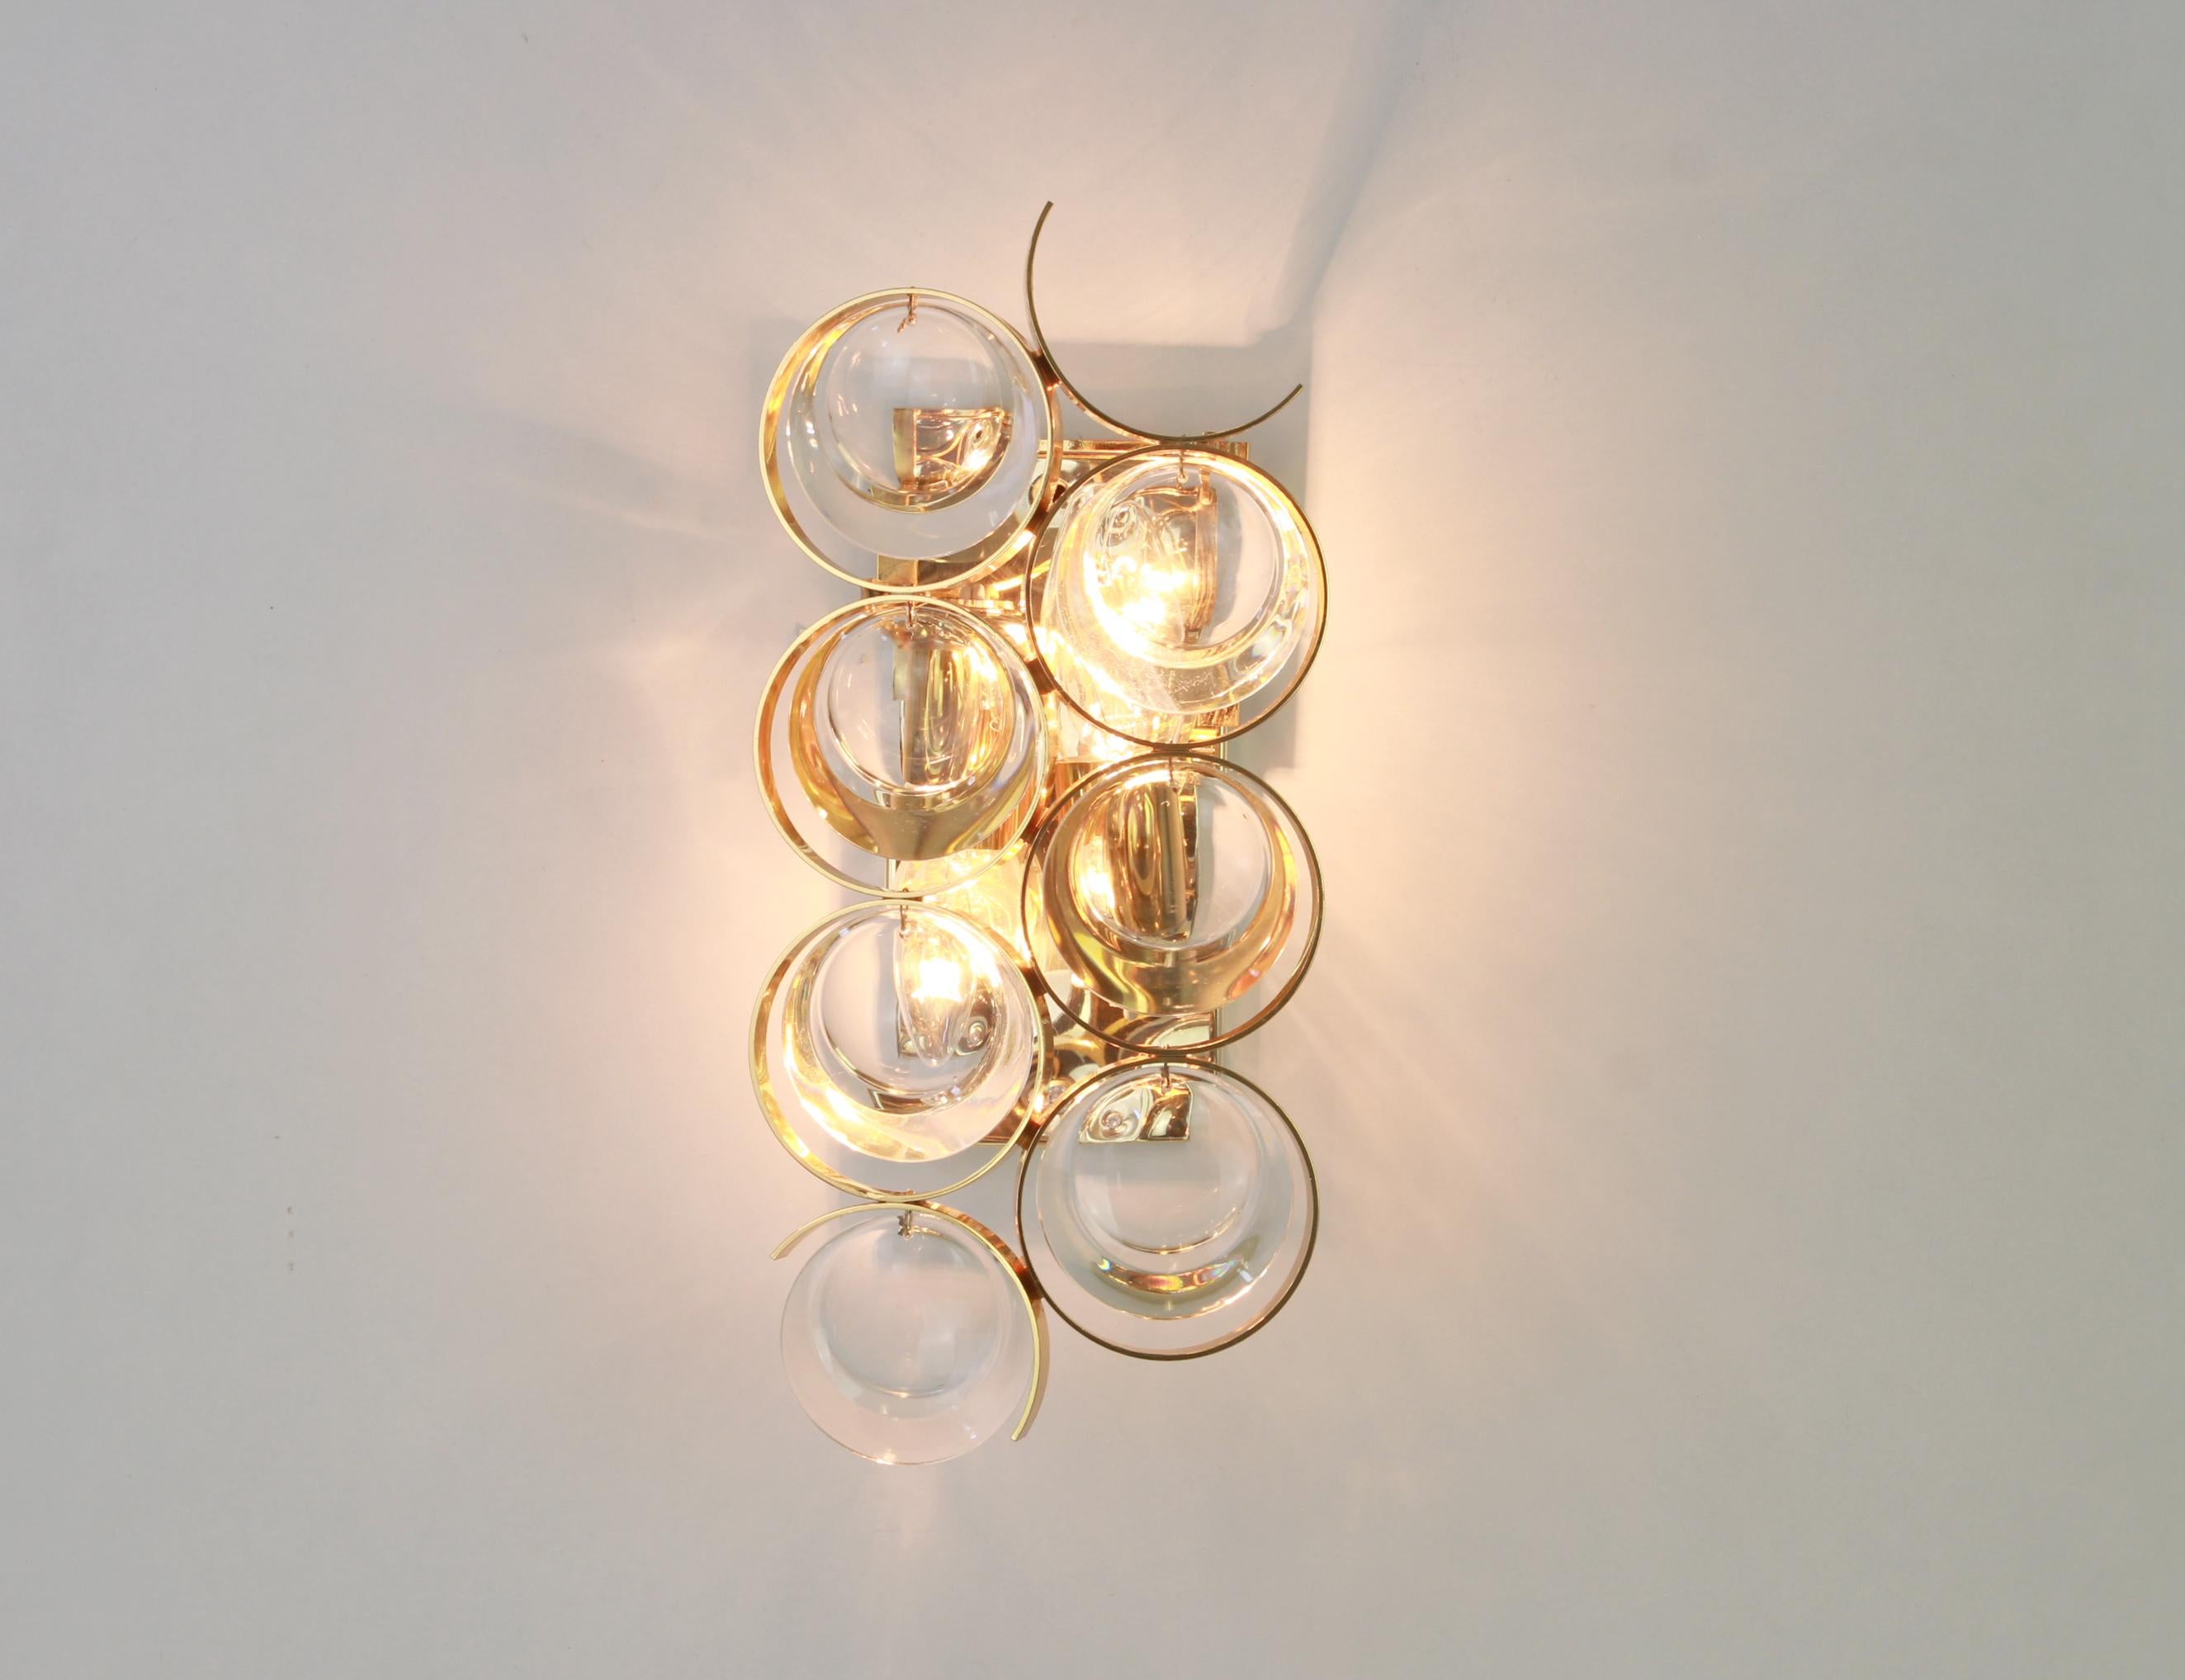 1 of 2 Golden Gilded Brass and Crystal Sconce by Palwa, Germany, 1960s For Sale 2